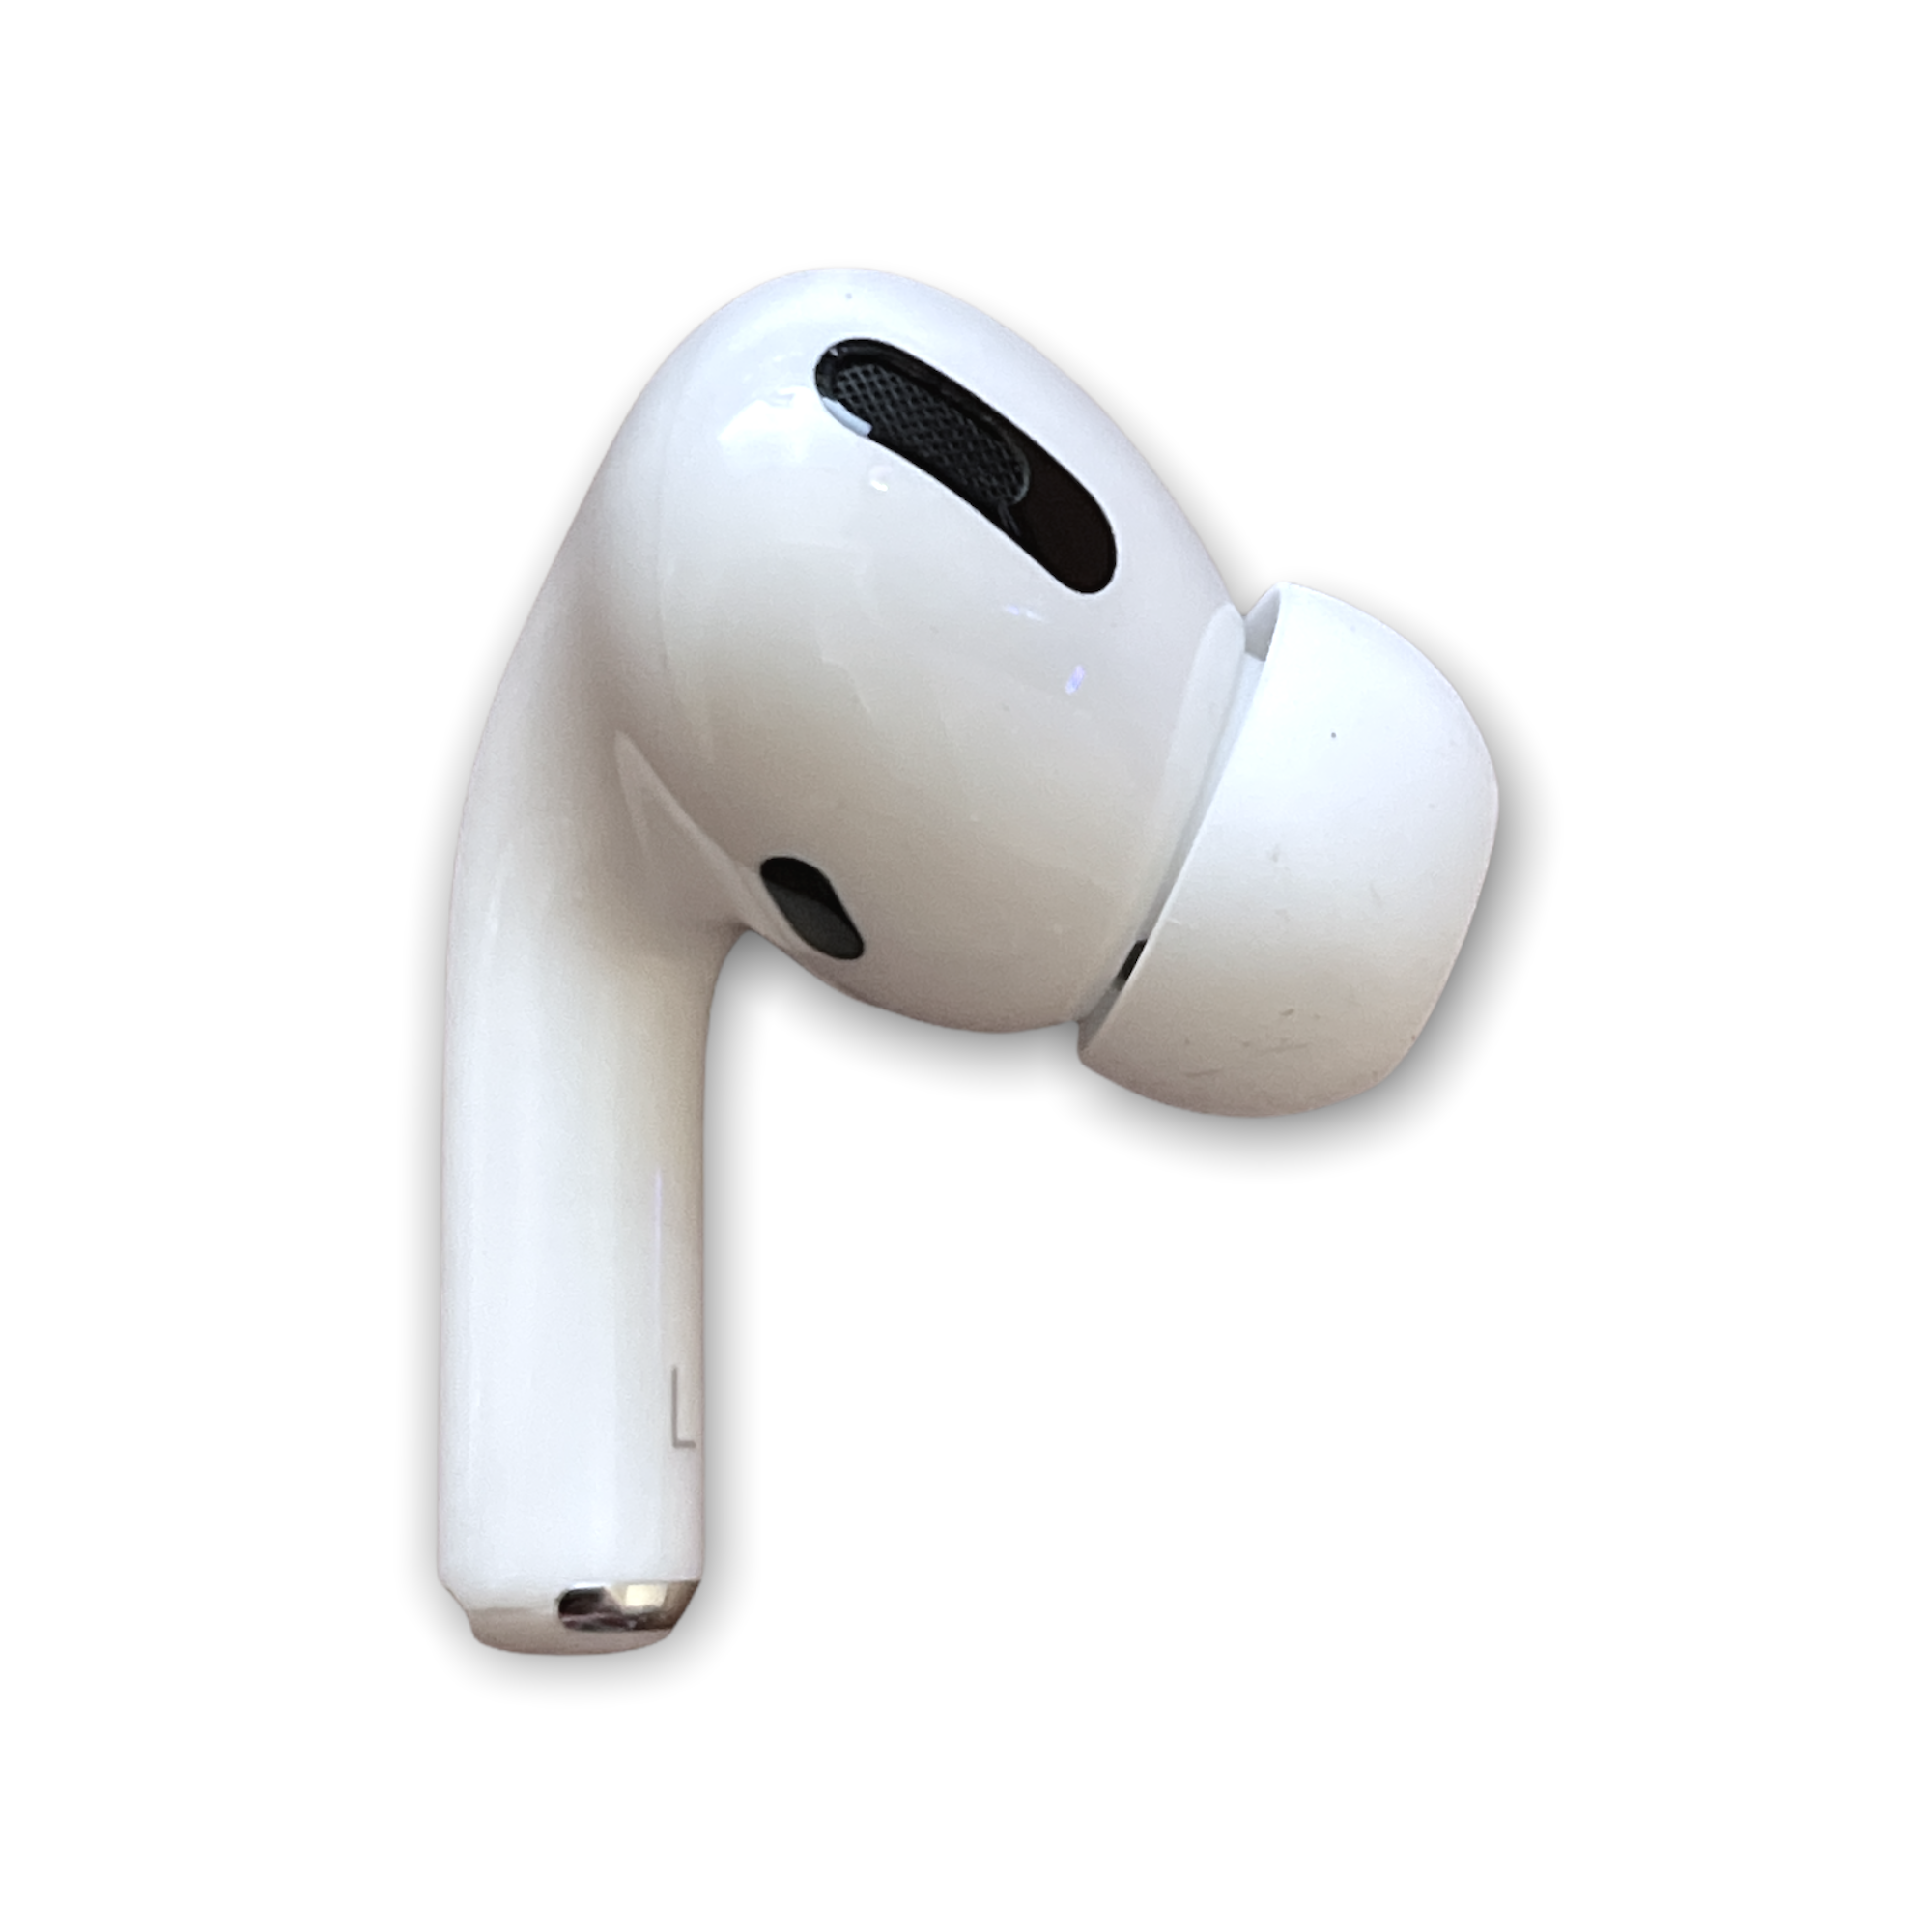 Airpod Pro - Left Side Only Pod Replacement